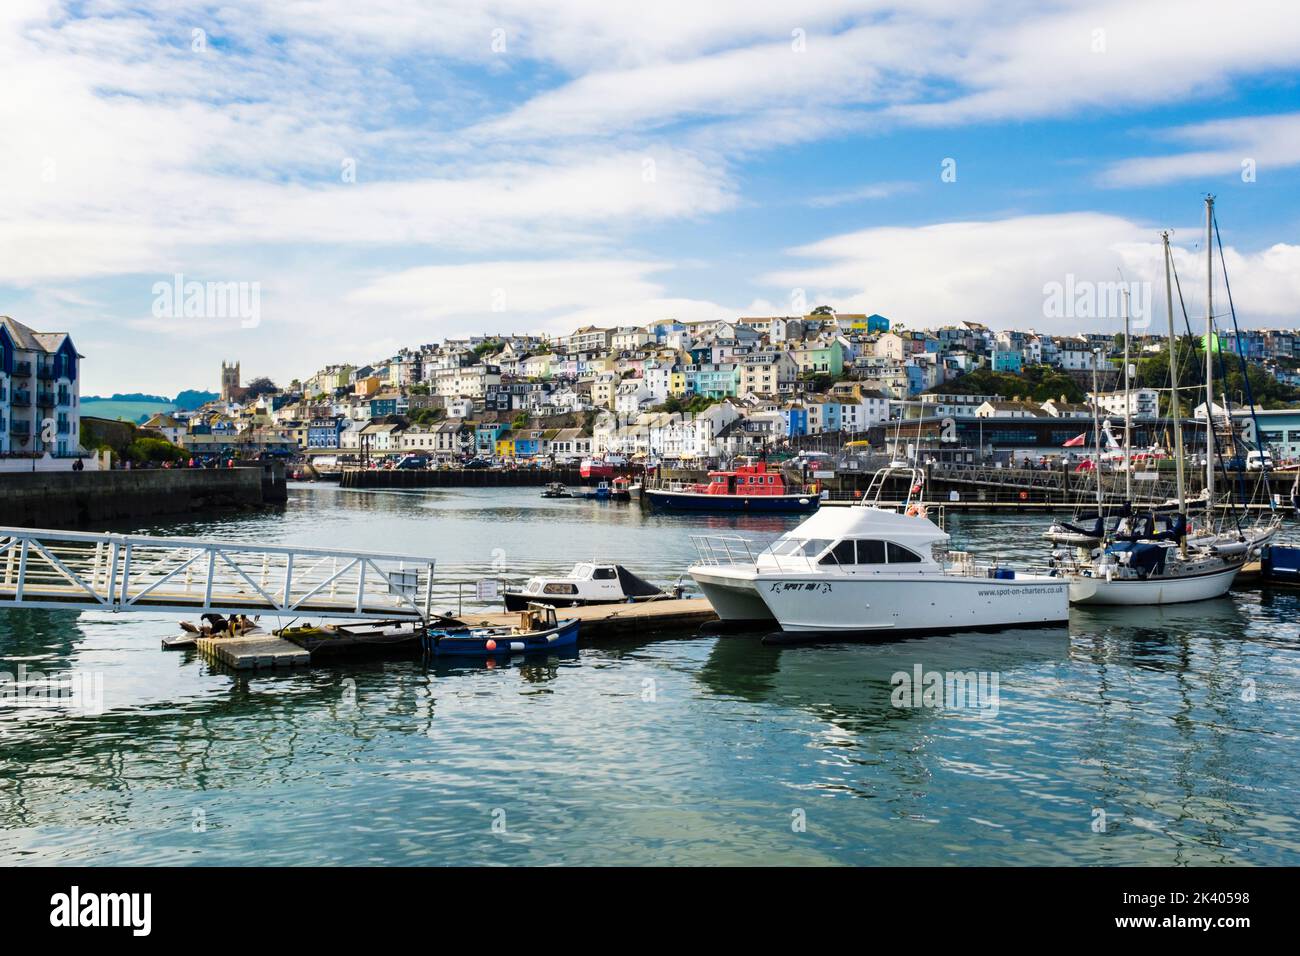 Charter boat by a jetty in the harbour. Brixham, Devon, England, UK, Britain Stock Photo